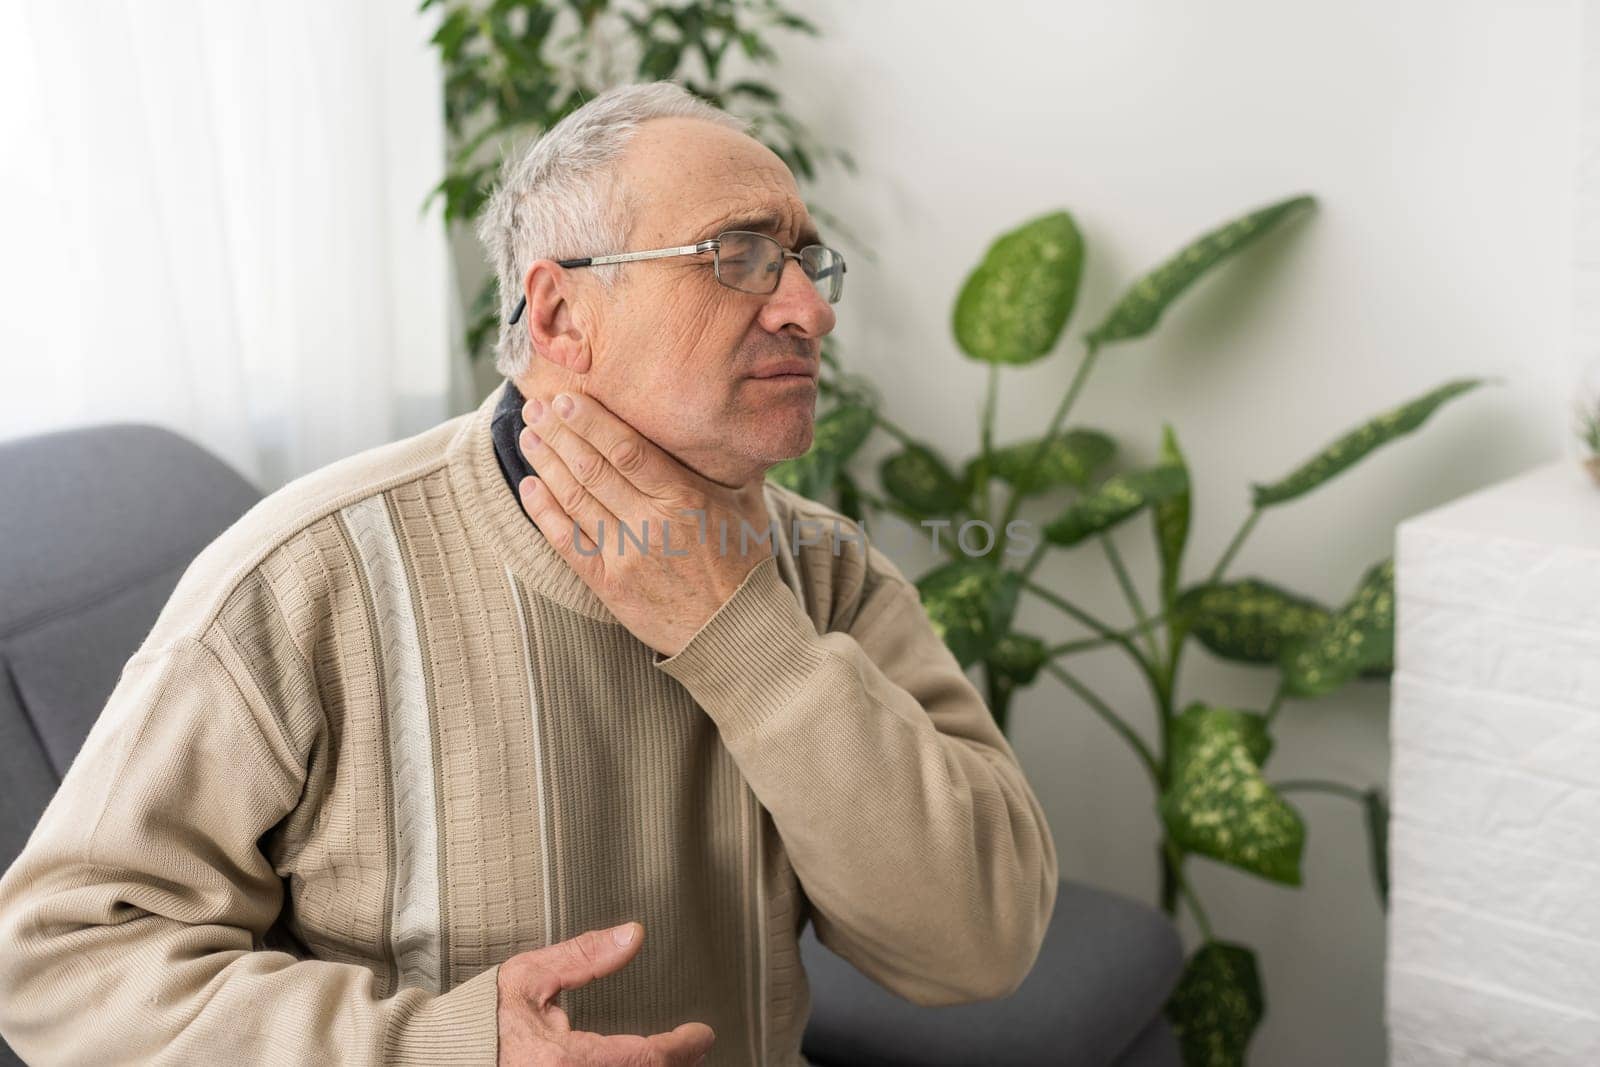 Elderly Man Having Toothache Touching Cheek Suffering From Pain Sitting On Sofa At Home